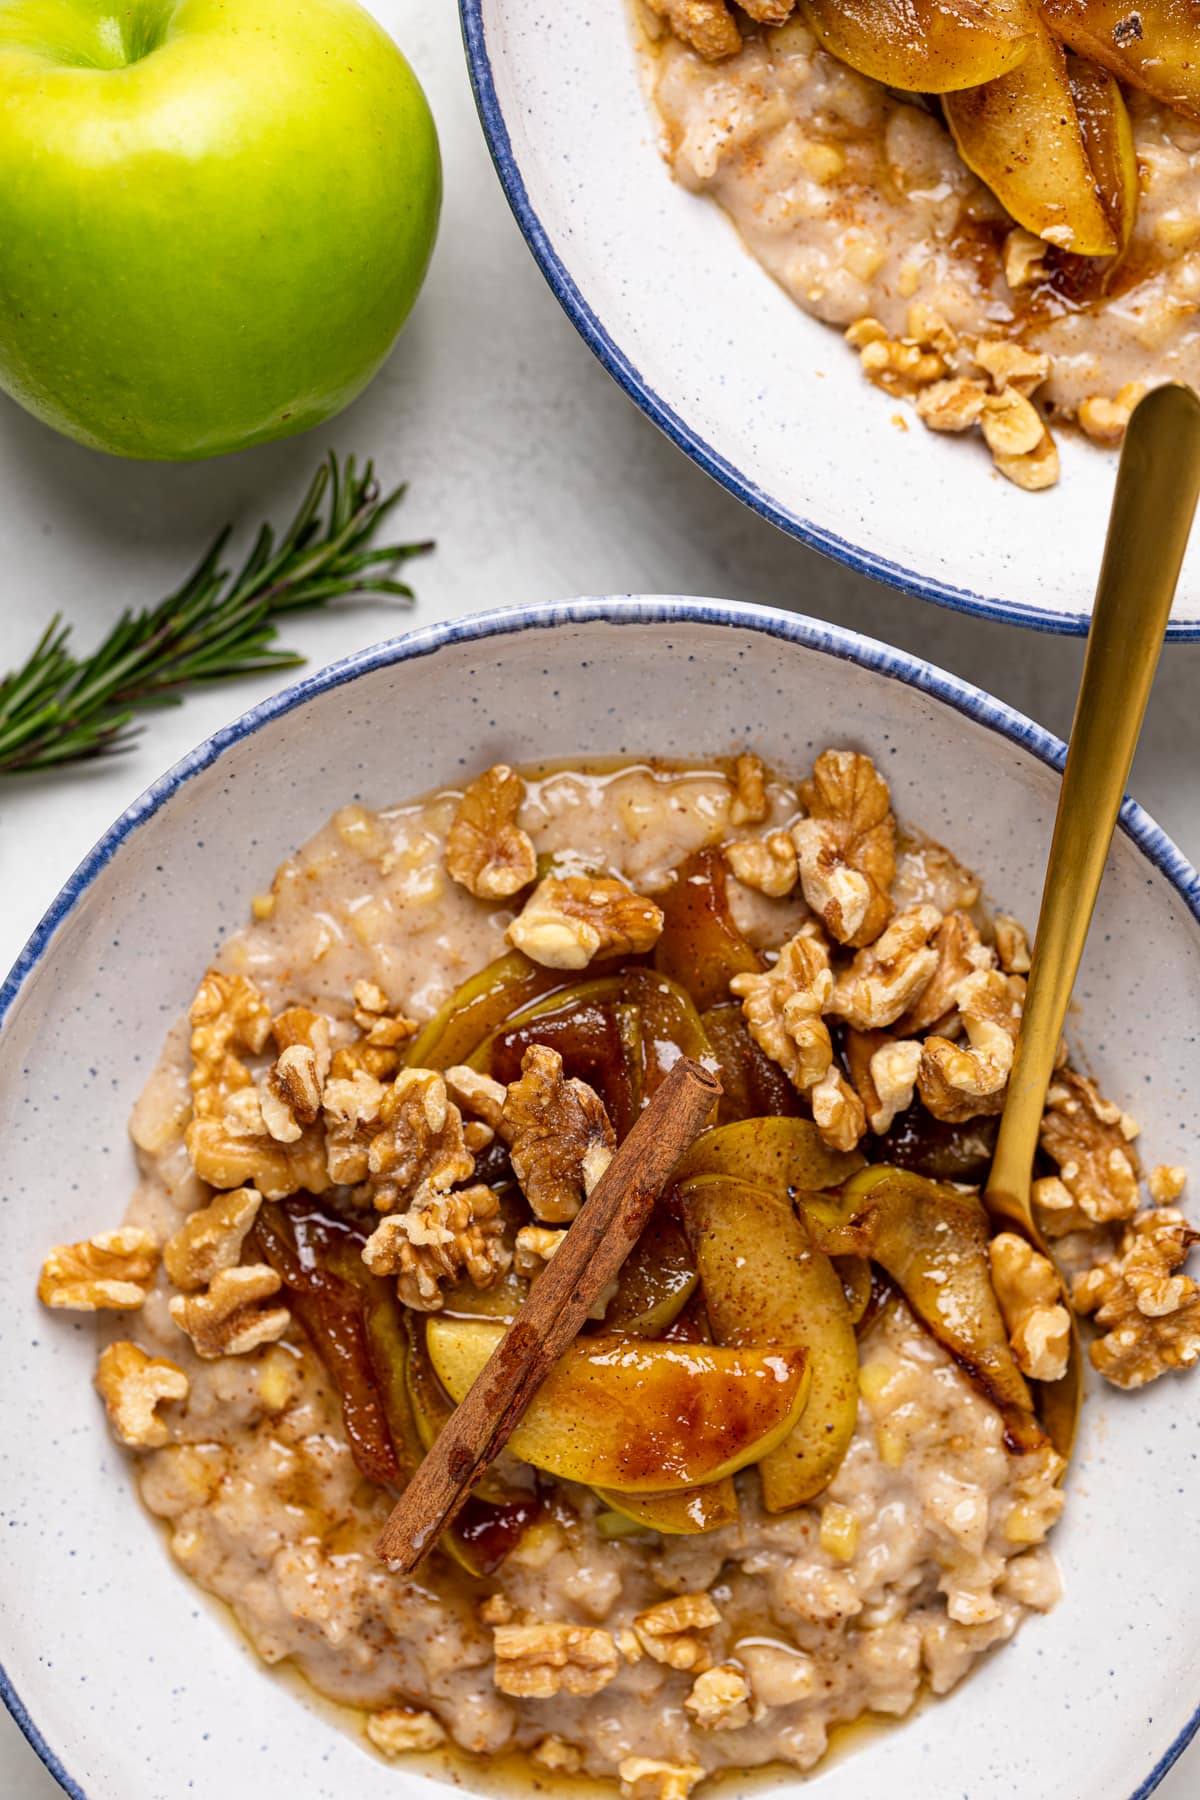 Bowl of Apple Cinnamon Oatmeal Porridge topped with cinnamon sticks, nuts, and caramelized apples